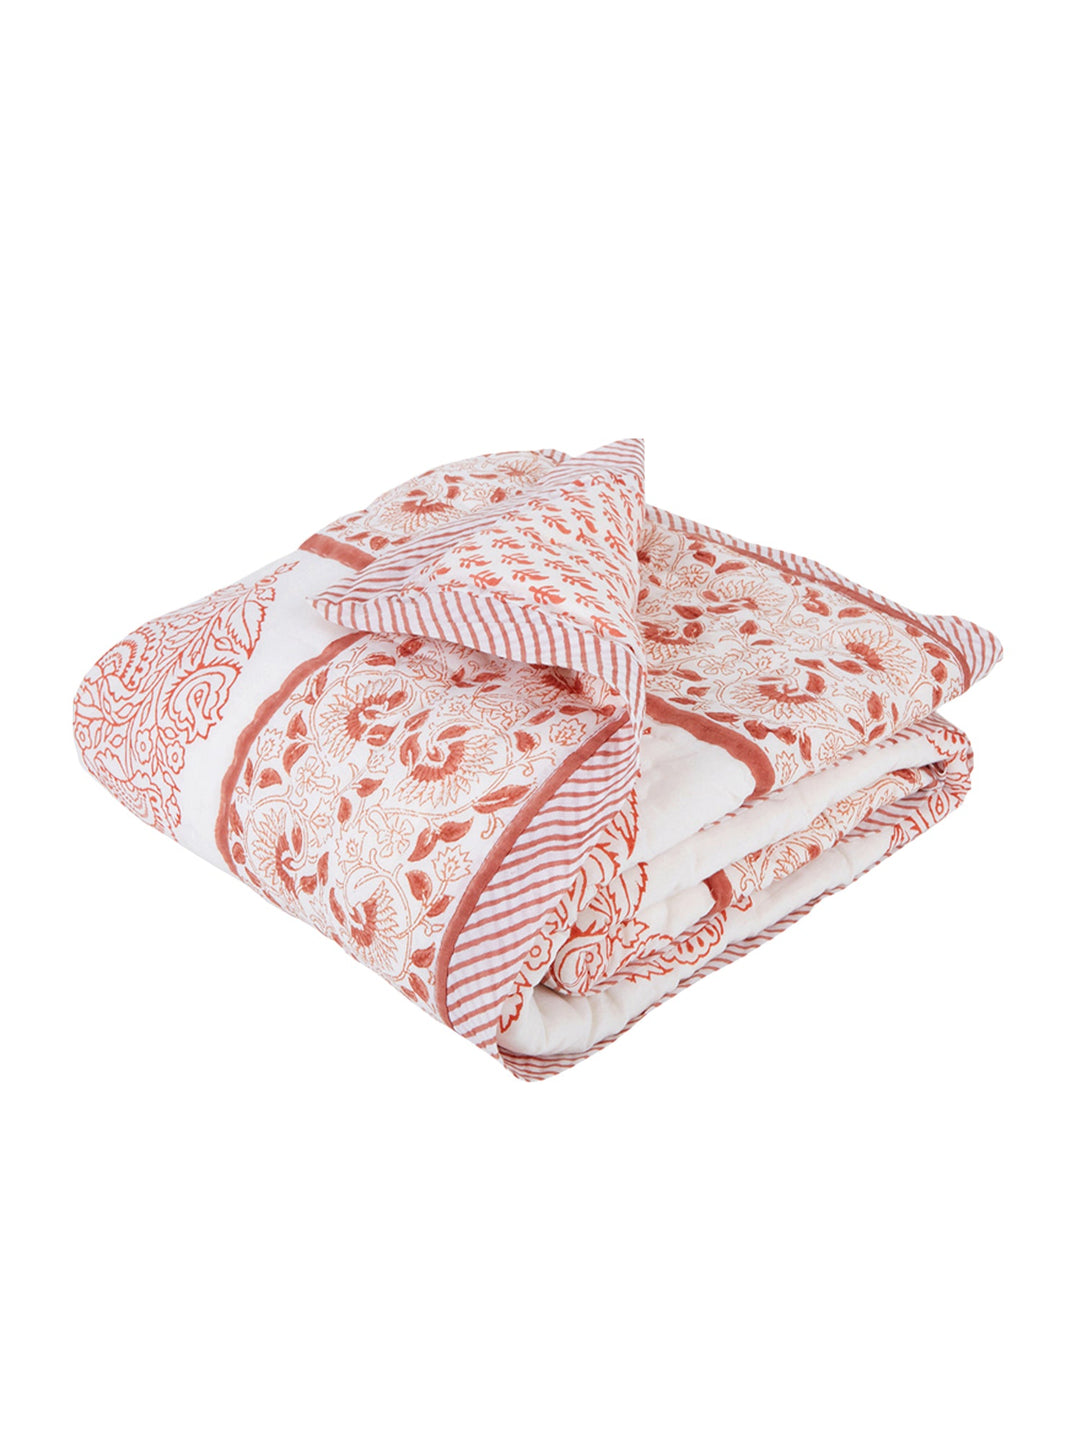 Block Printed Cotton Baby Quilt - Pink City Print